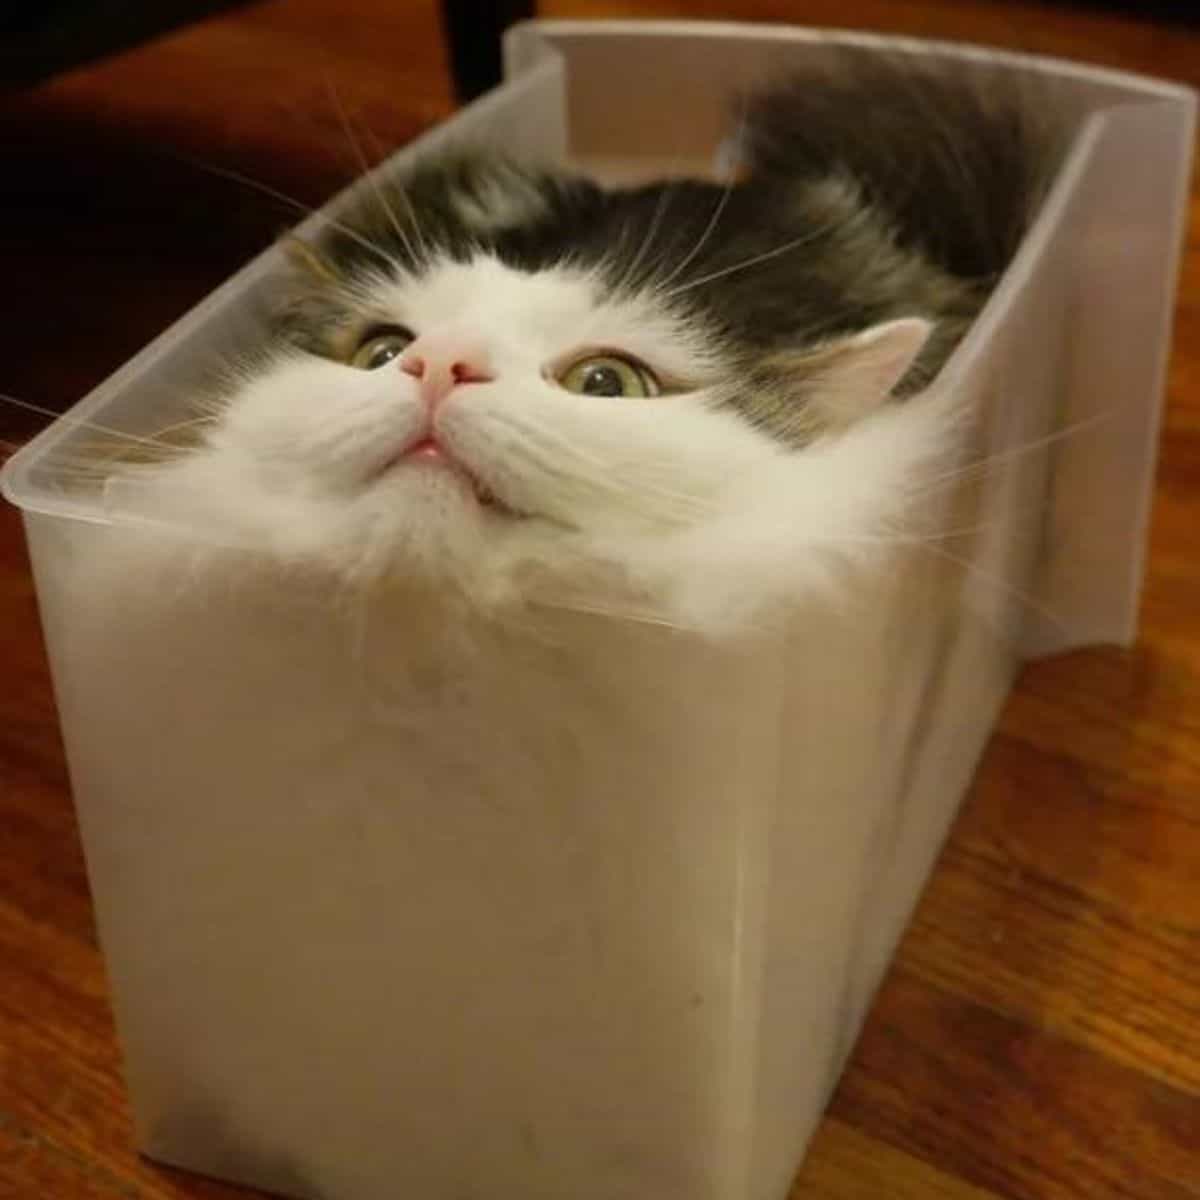 cat lying in a plastic container